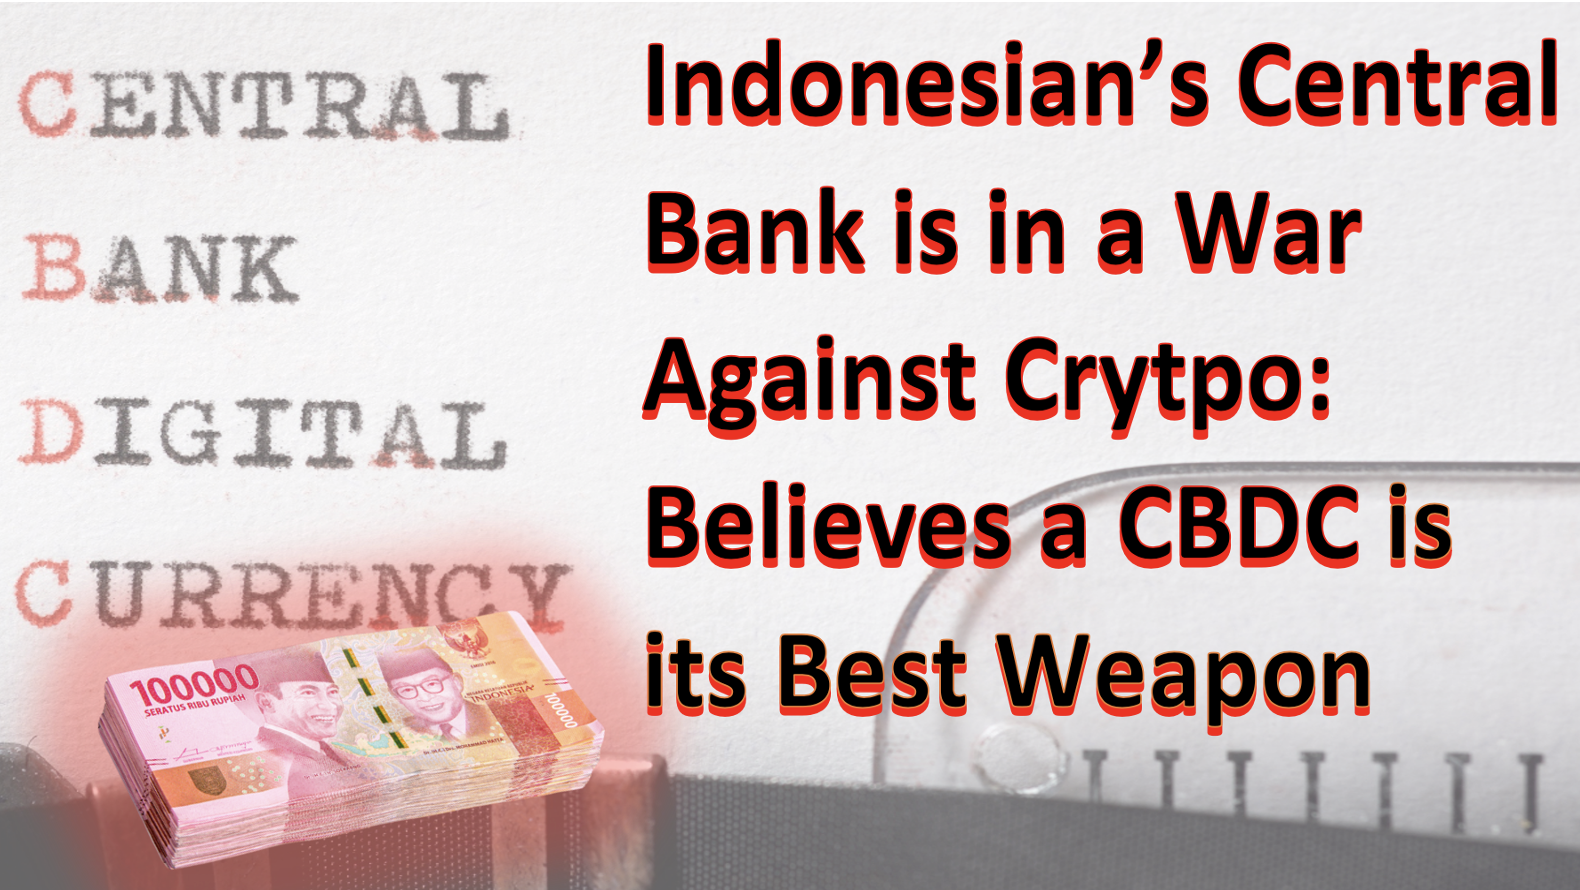 Indonesia is Waging a War on Crypto